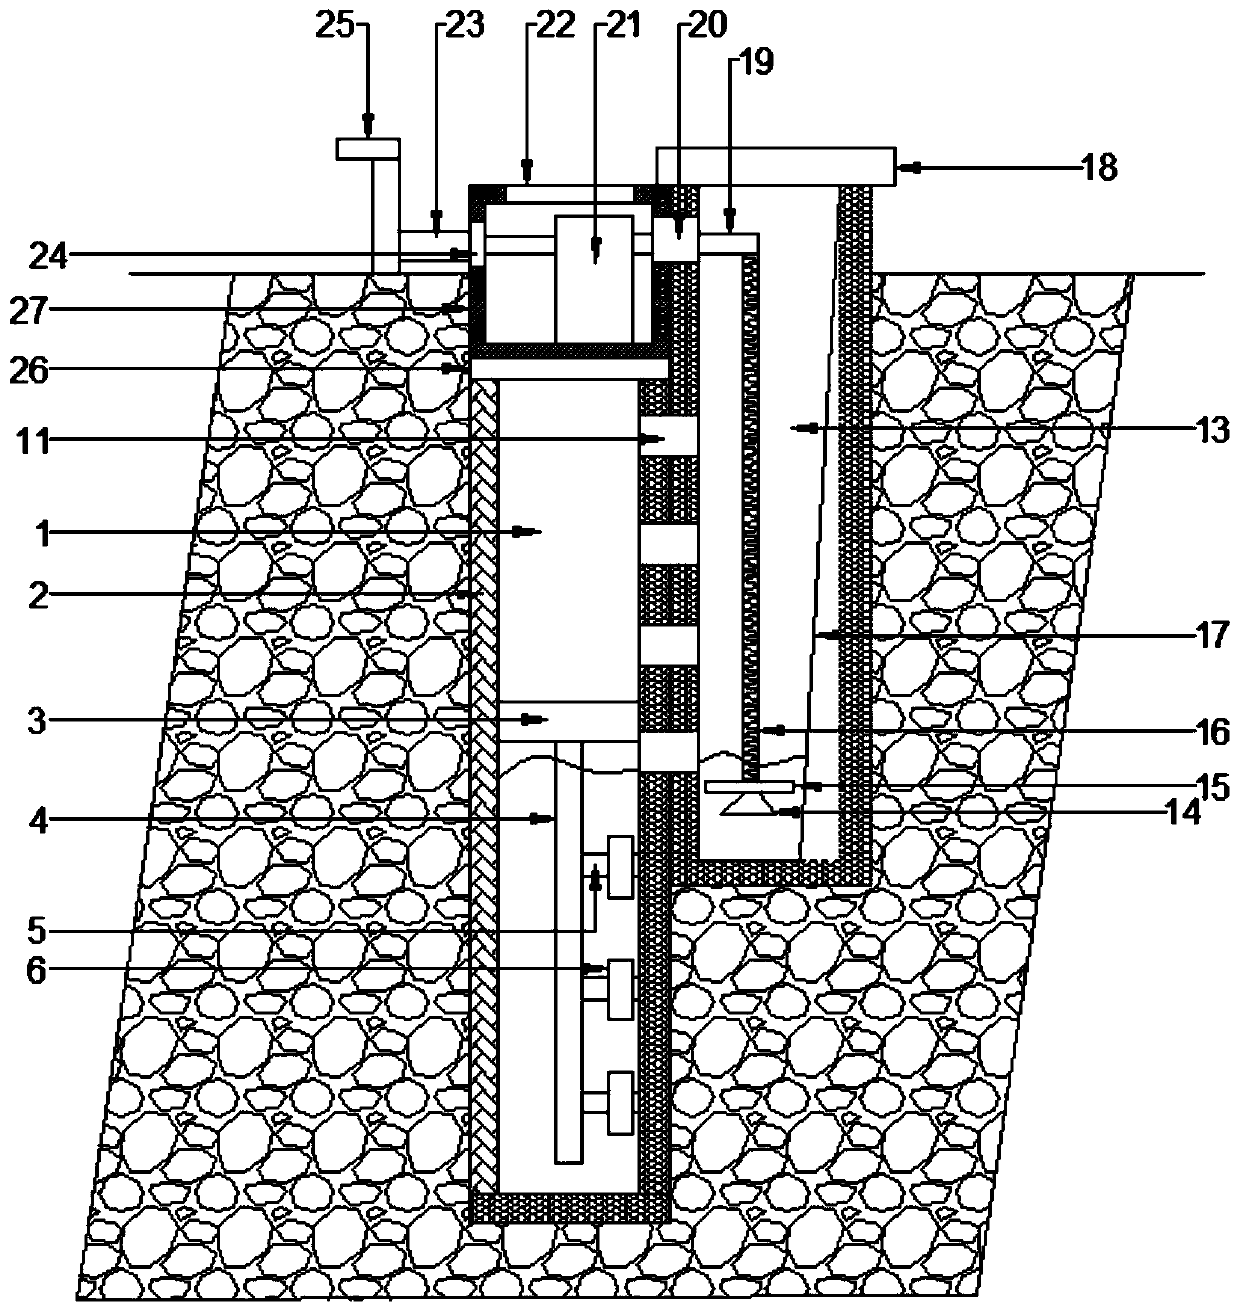 A self-purifying water well with secondary sedimentation